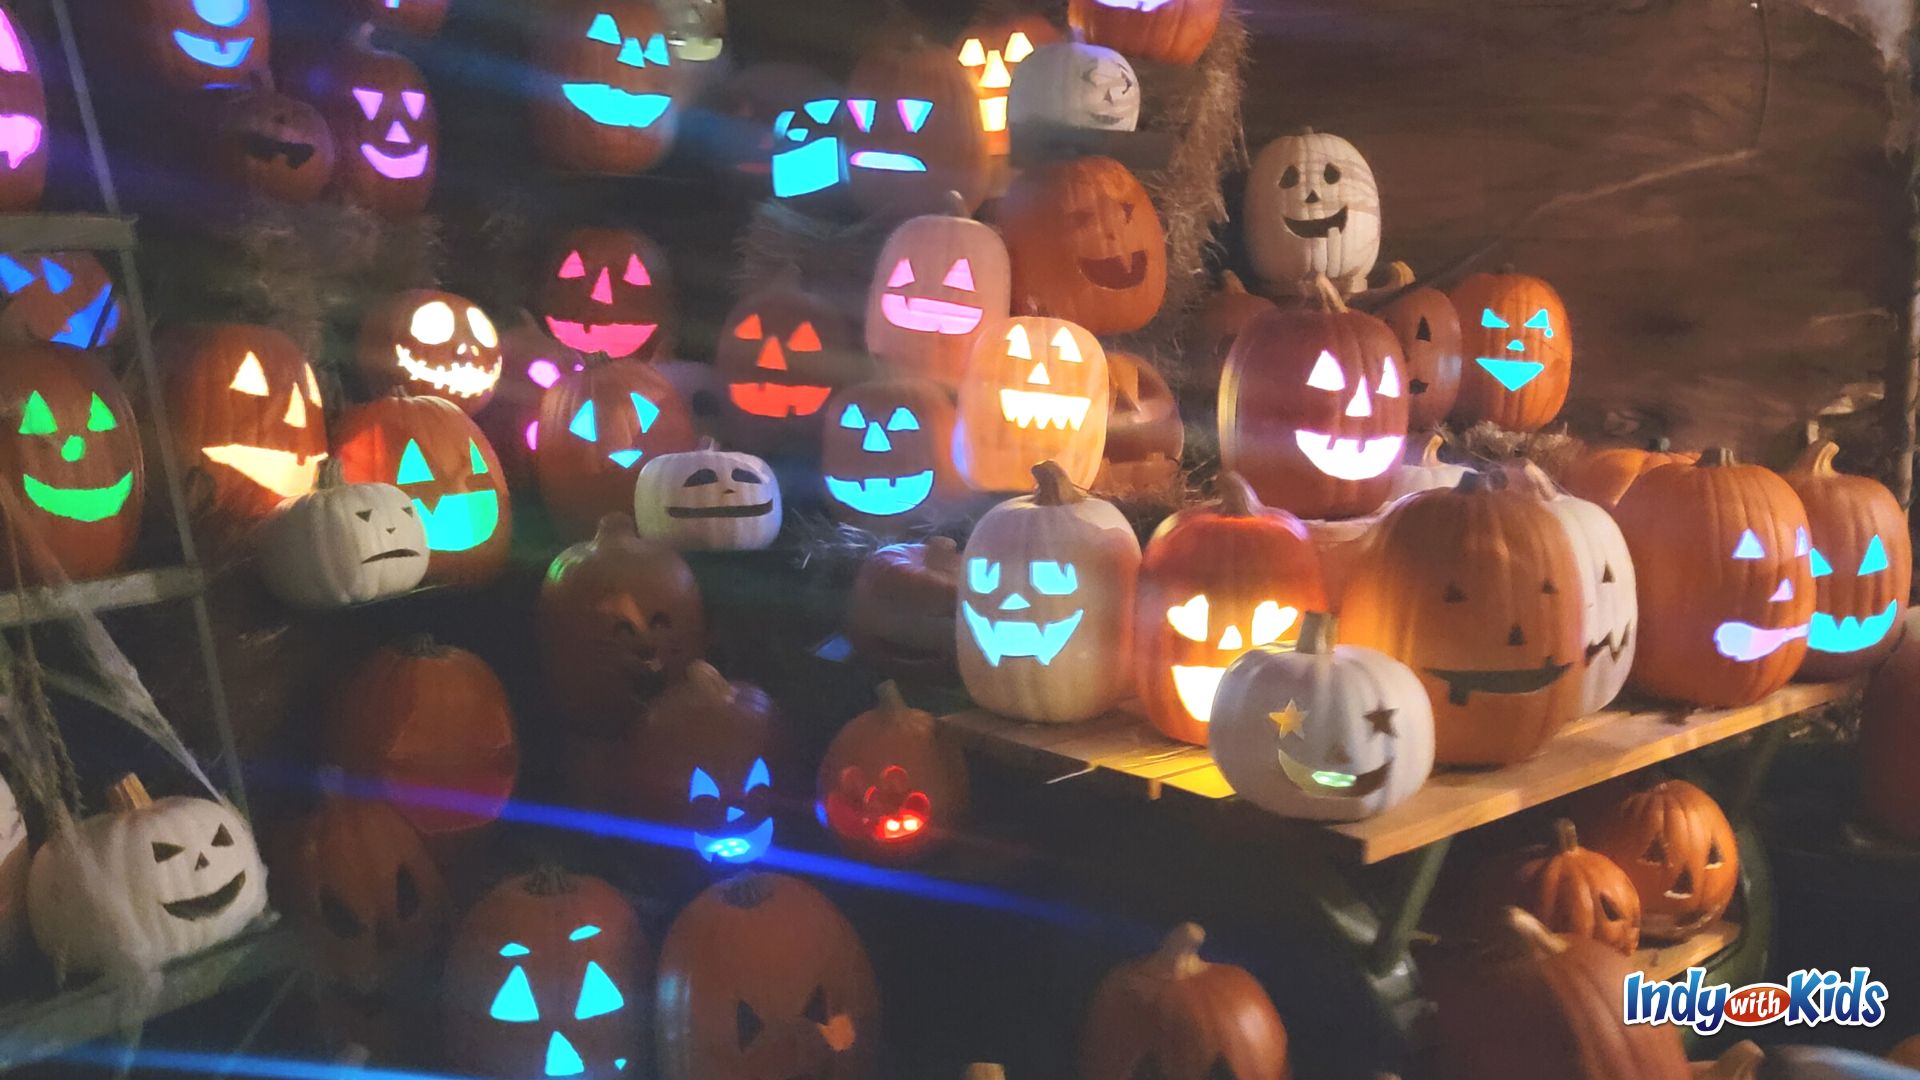 The PumpkinTown Sullivans Express experience is a blast for families with young children.